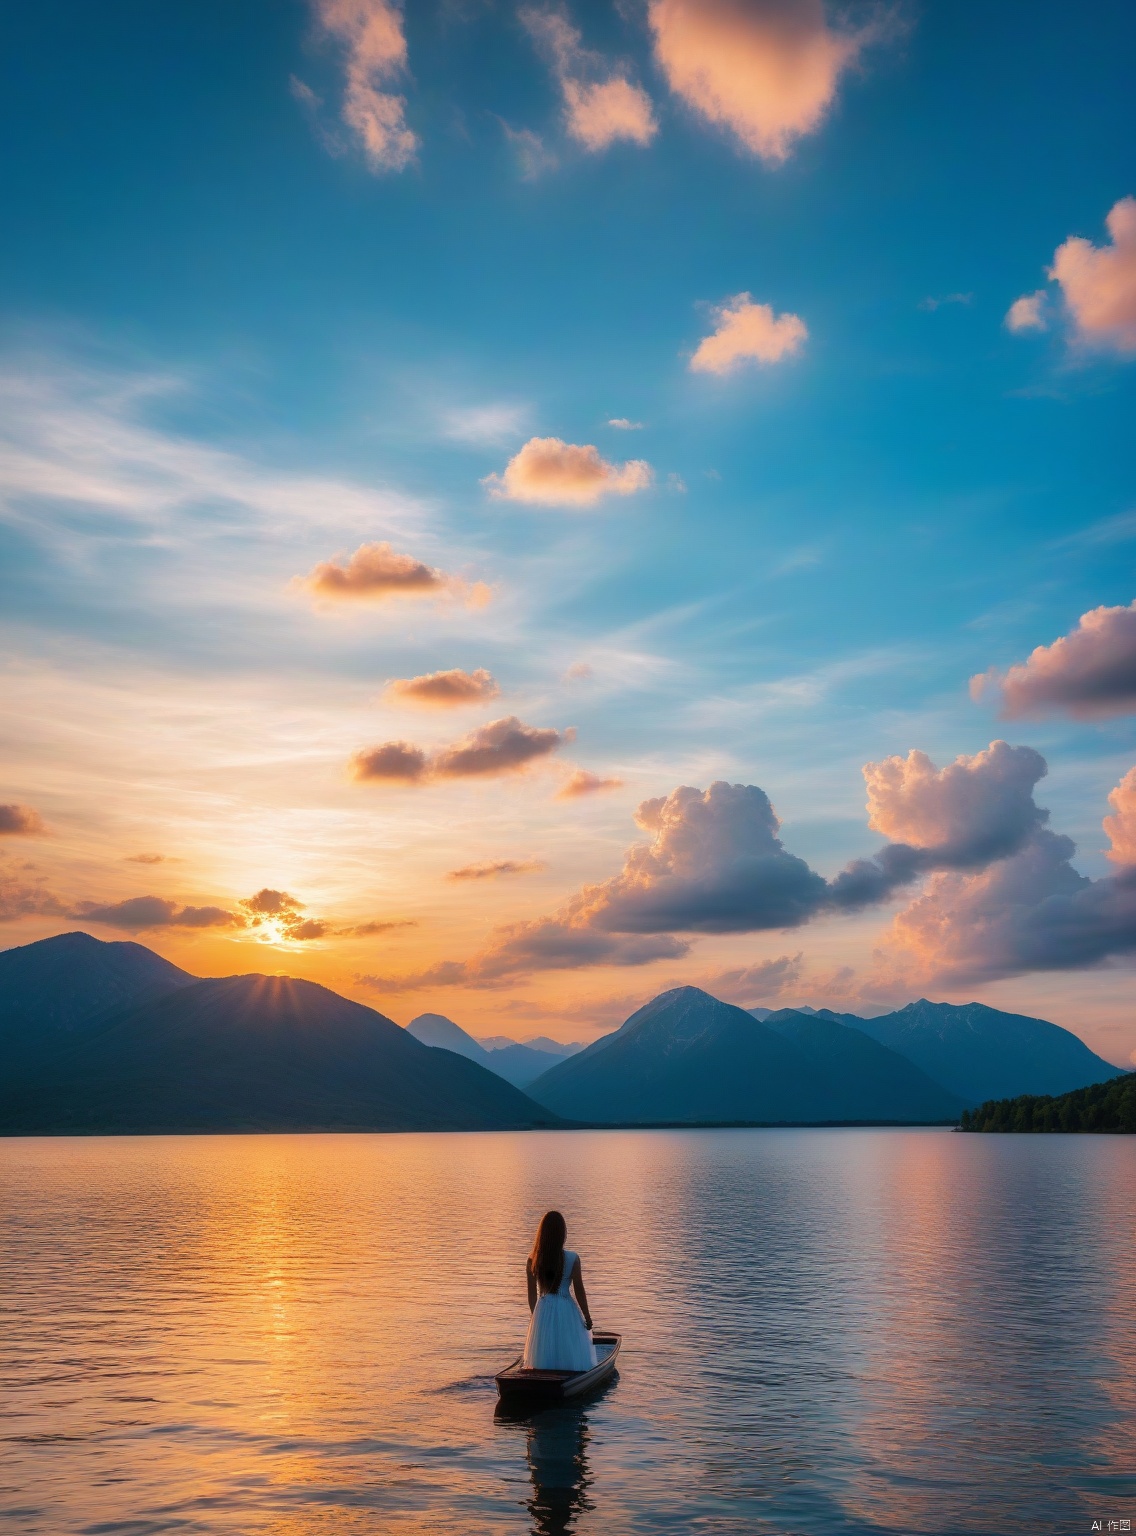  Masterpiece, ultra-high definition image quality, a female, sunset glow, lake, blue sky, white clouds